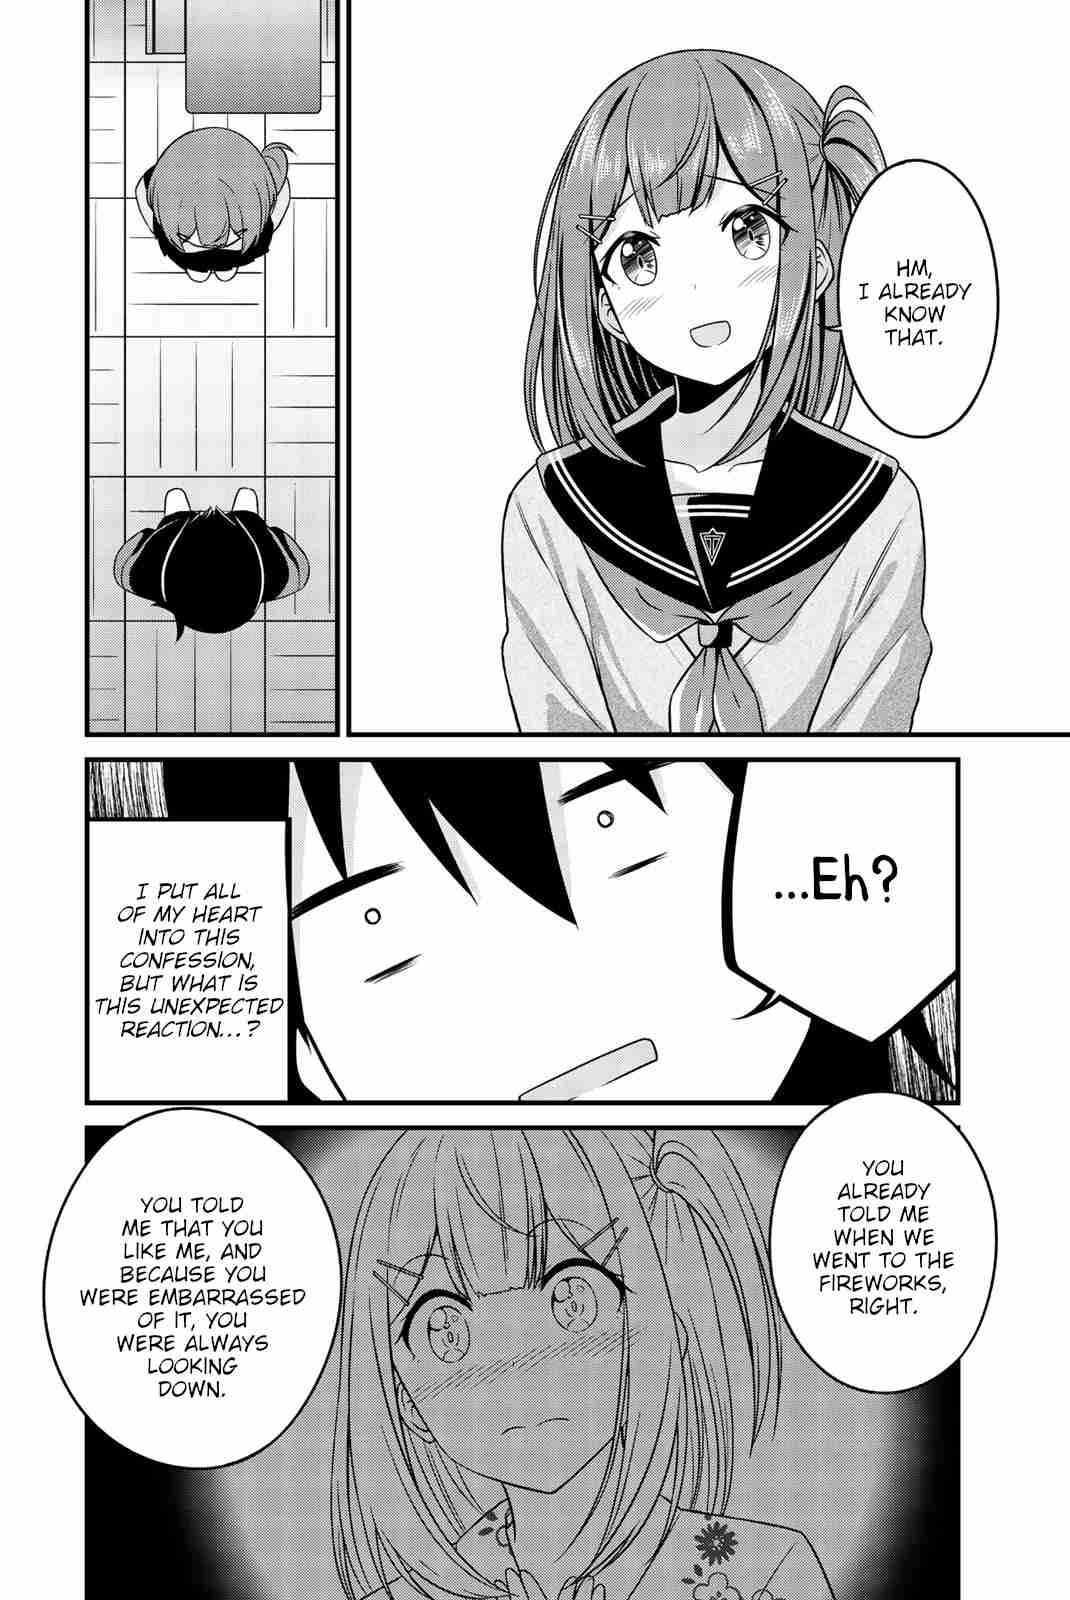 Arigatights! Vol. 3 Ch. 44 Confession and Tights